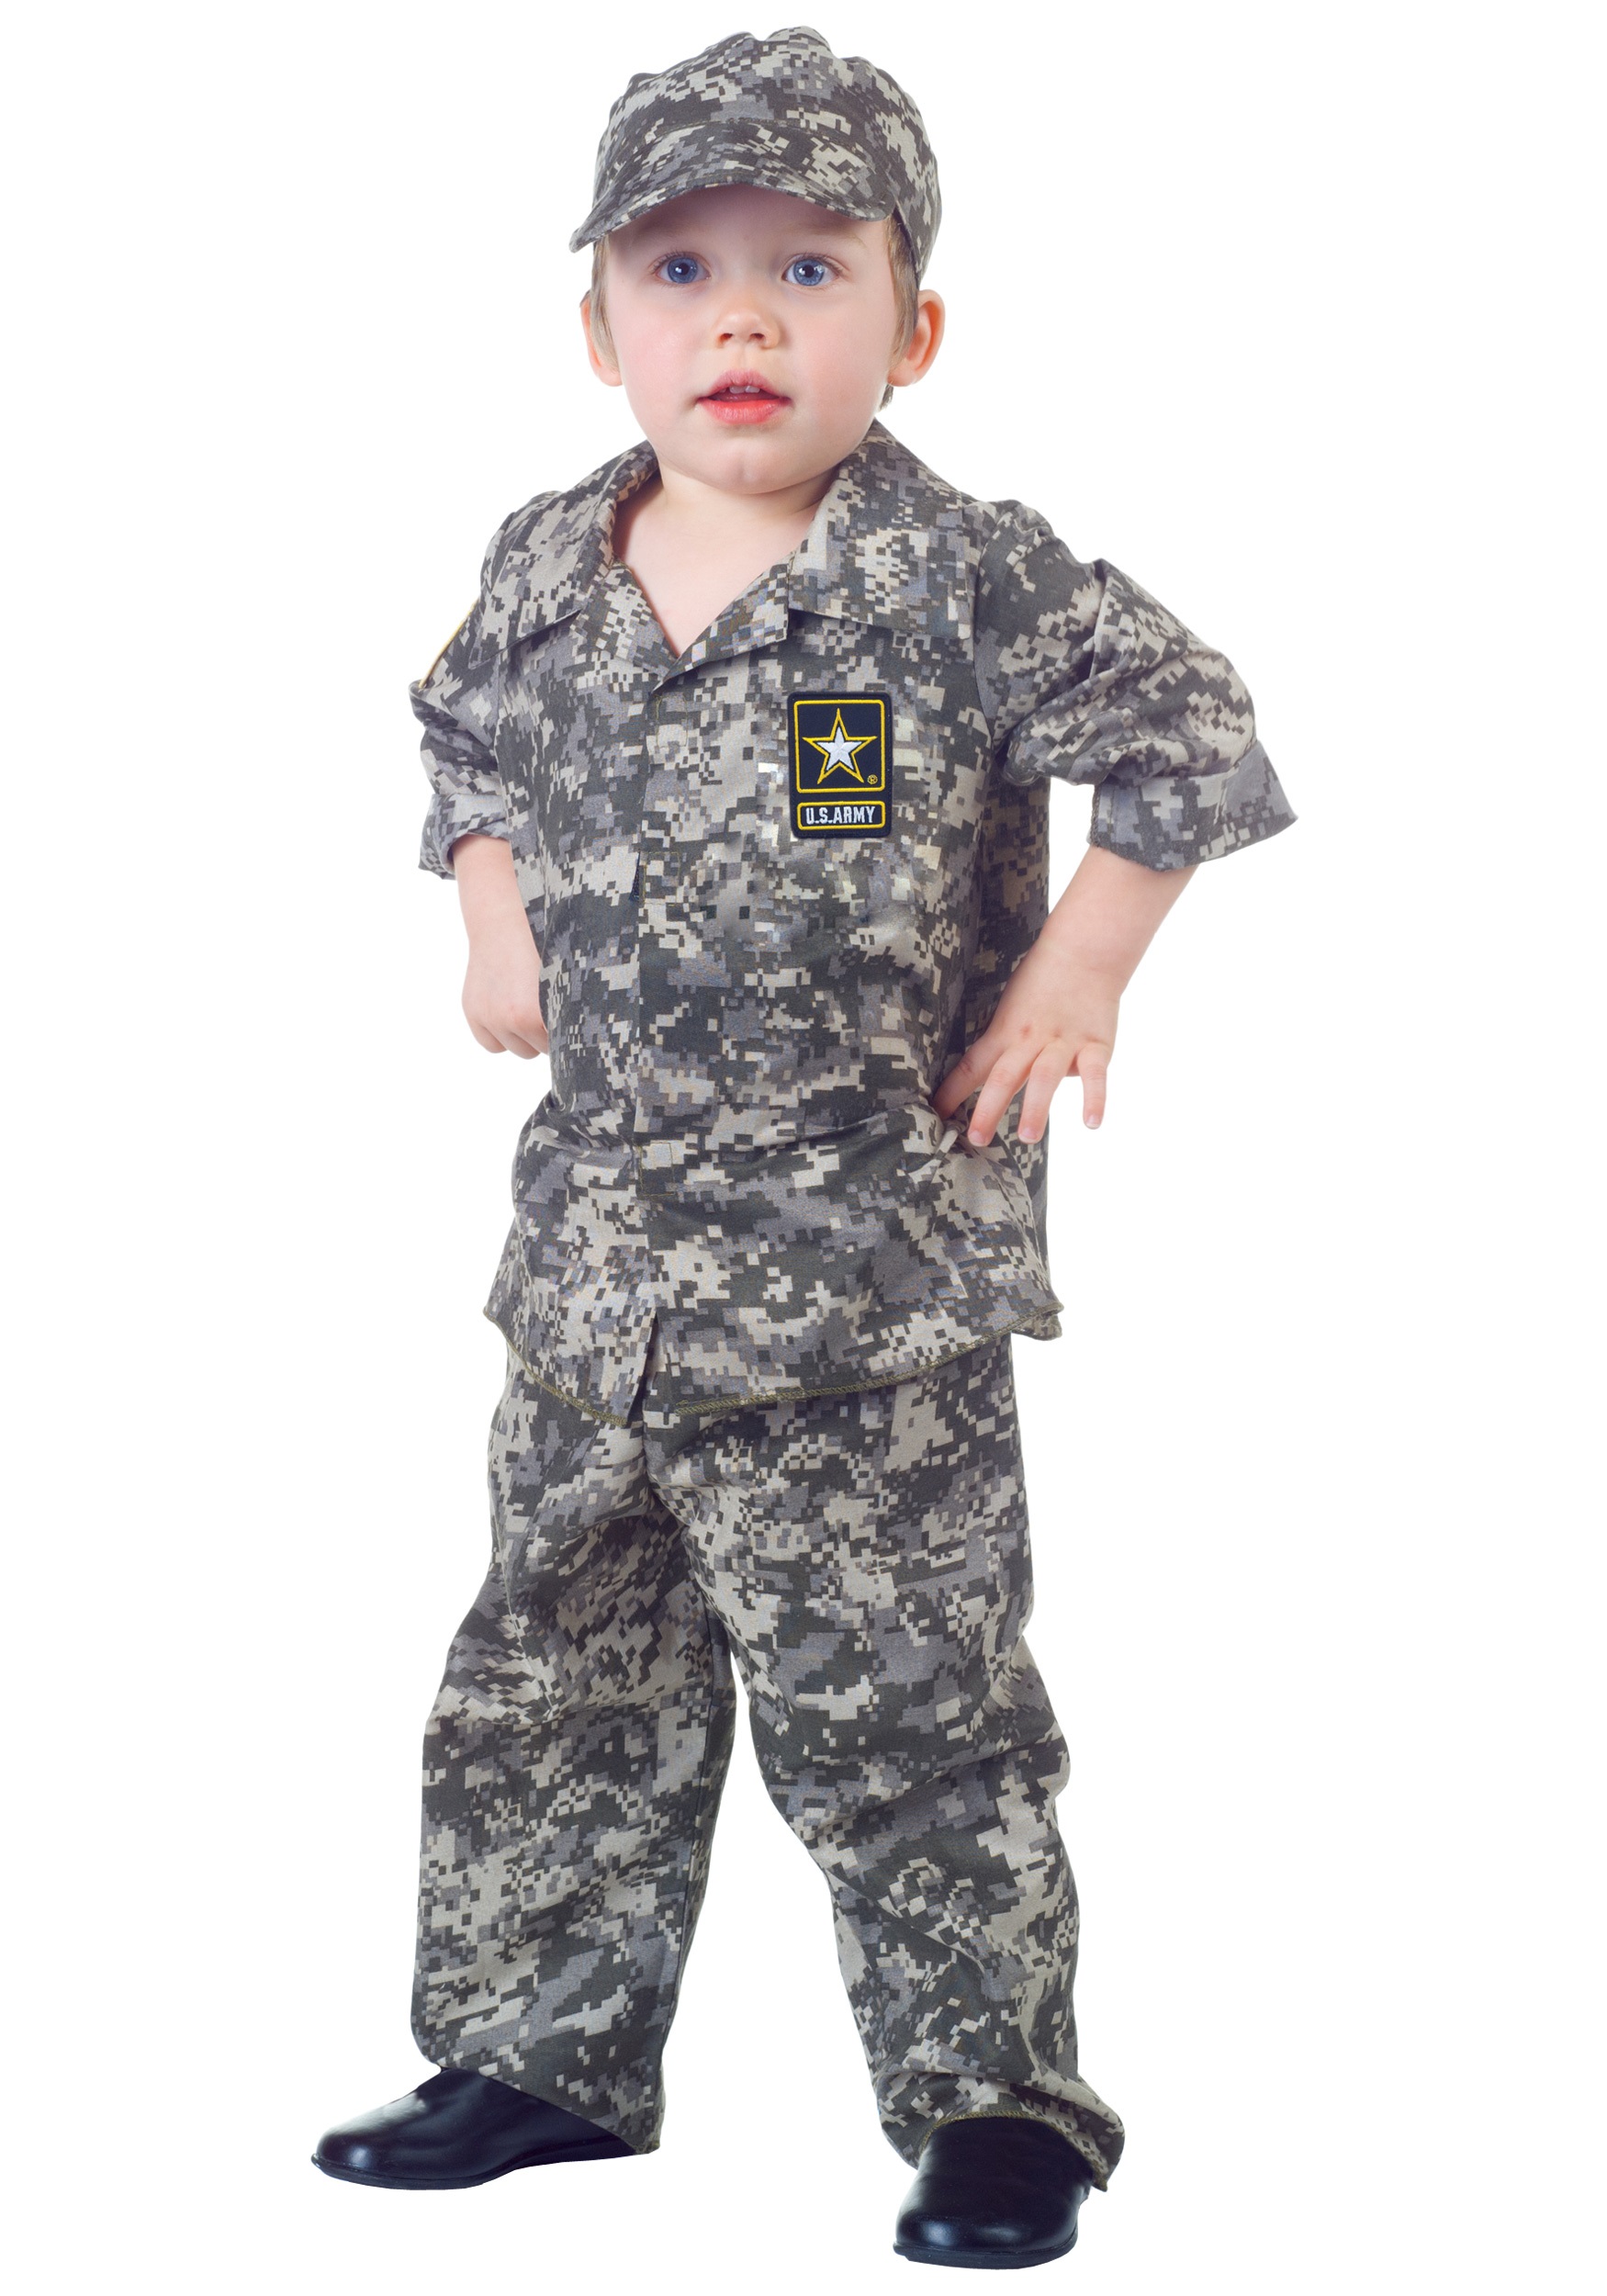 Army Camo Toddler Costume for Boys